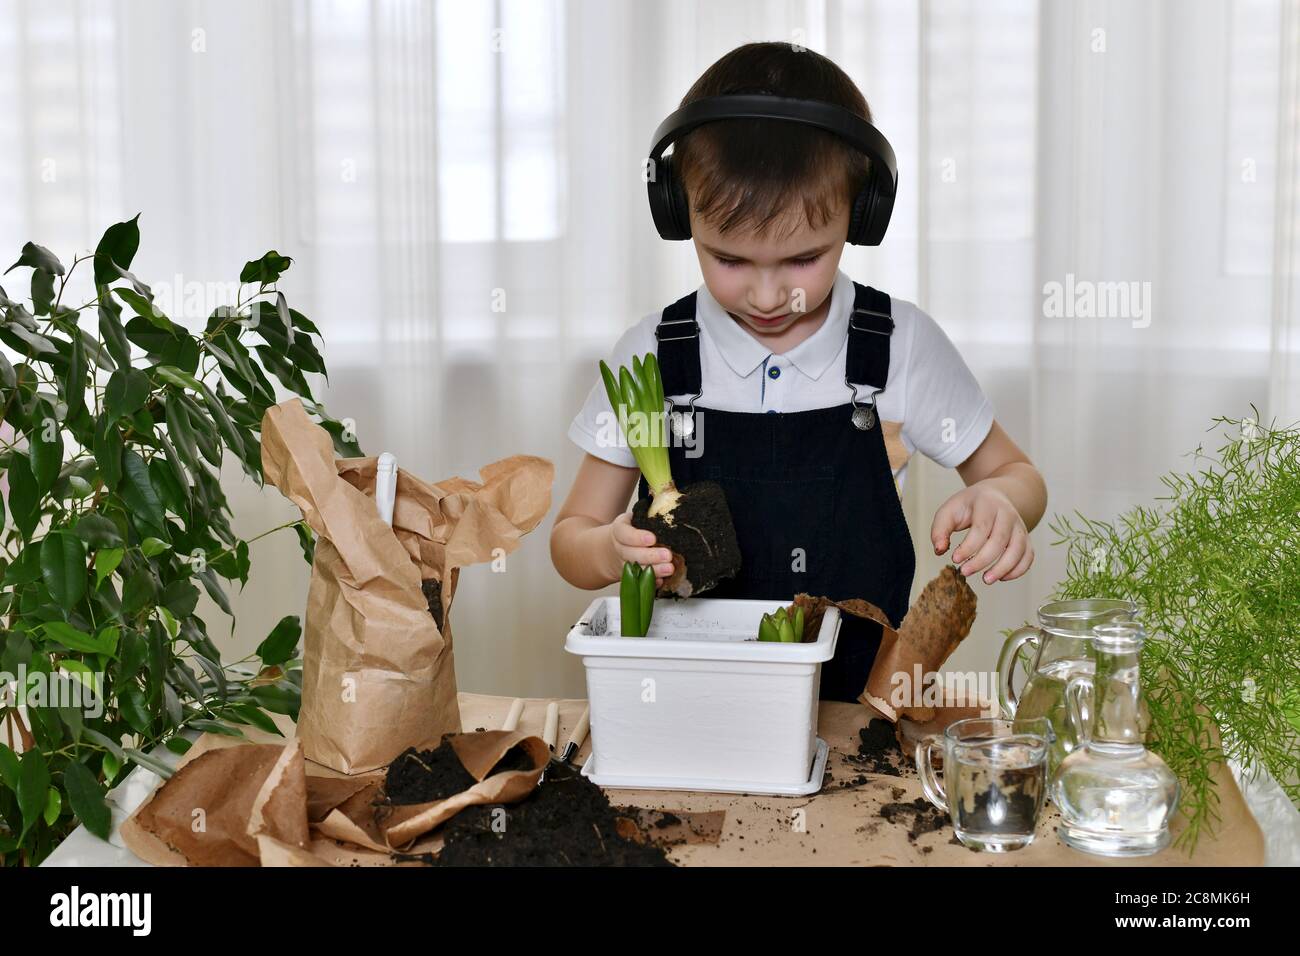 The boy is engaged of hyacinths, independently copes with difficulties during landing. Stock Photo